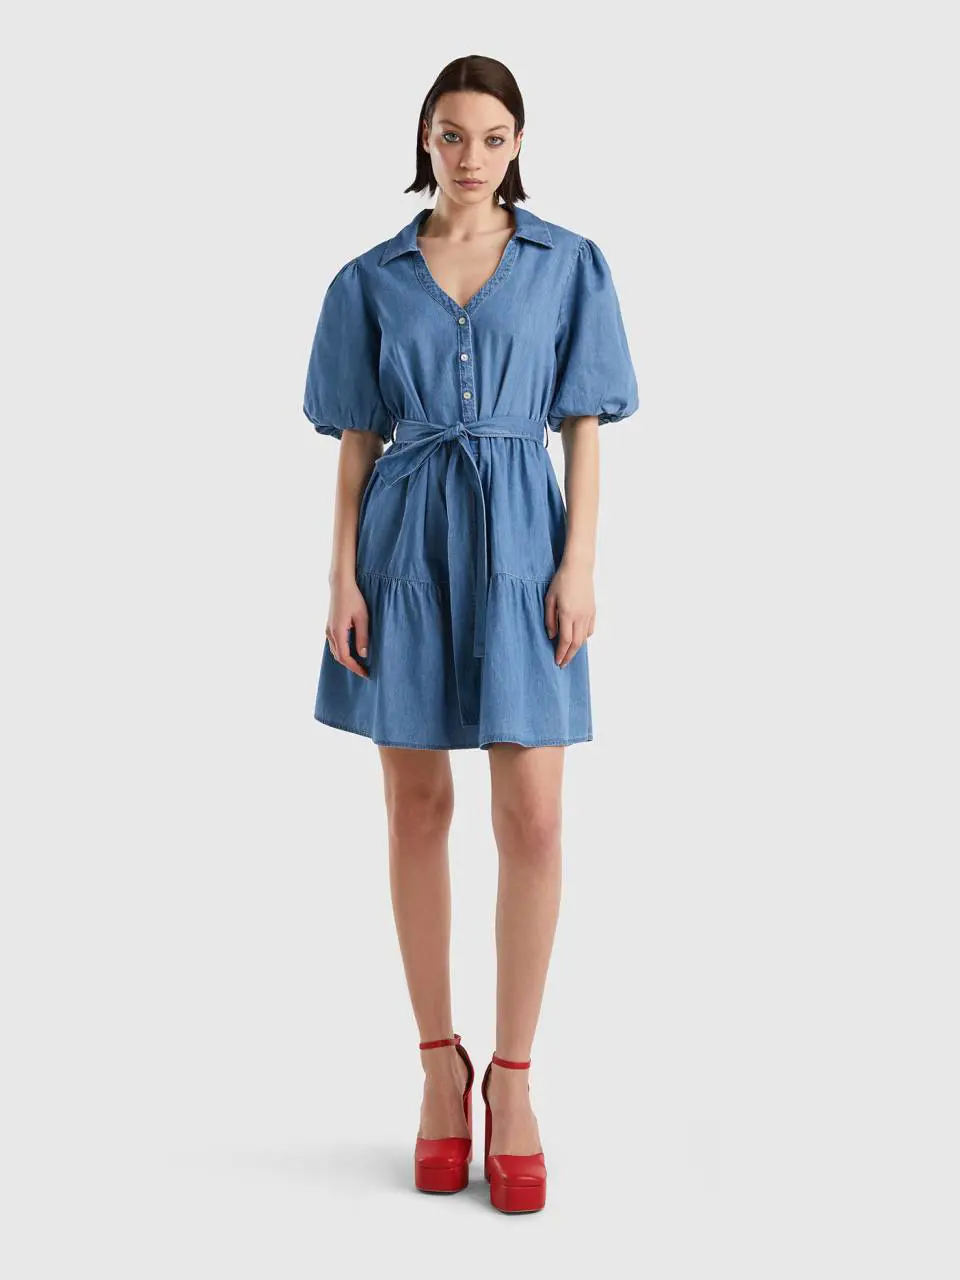 Benetton dress in chambray with flounce. 1